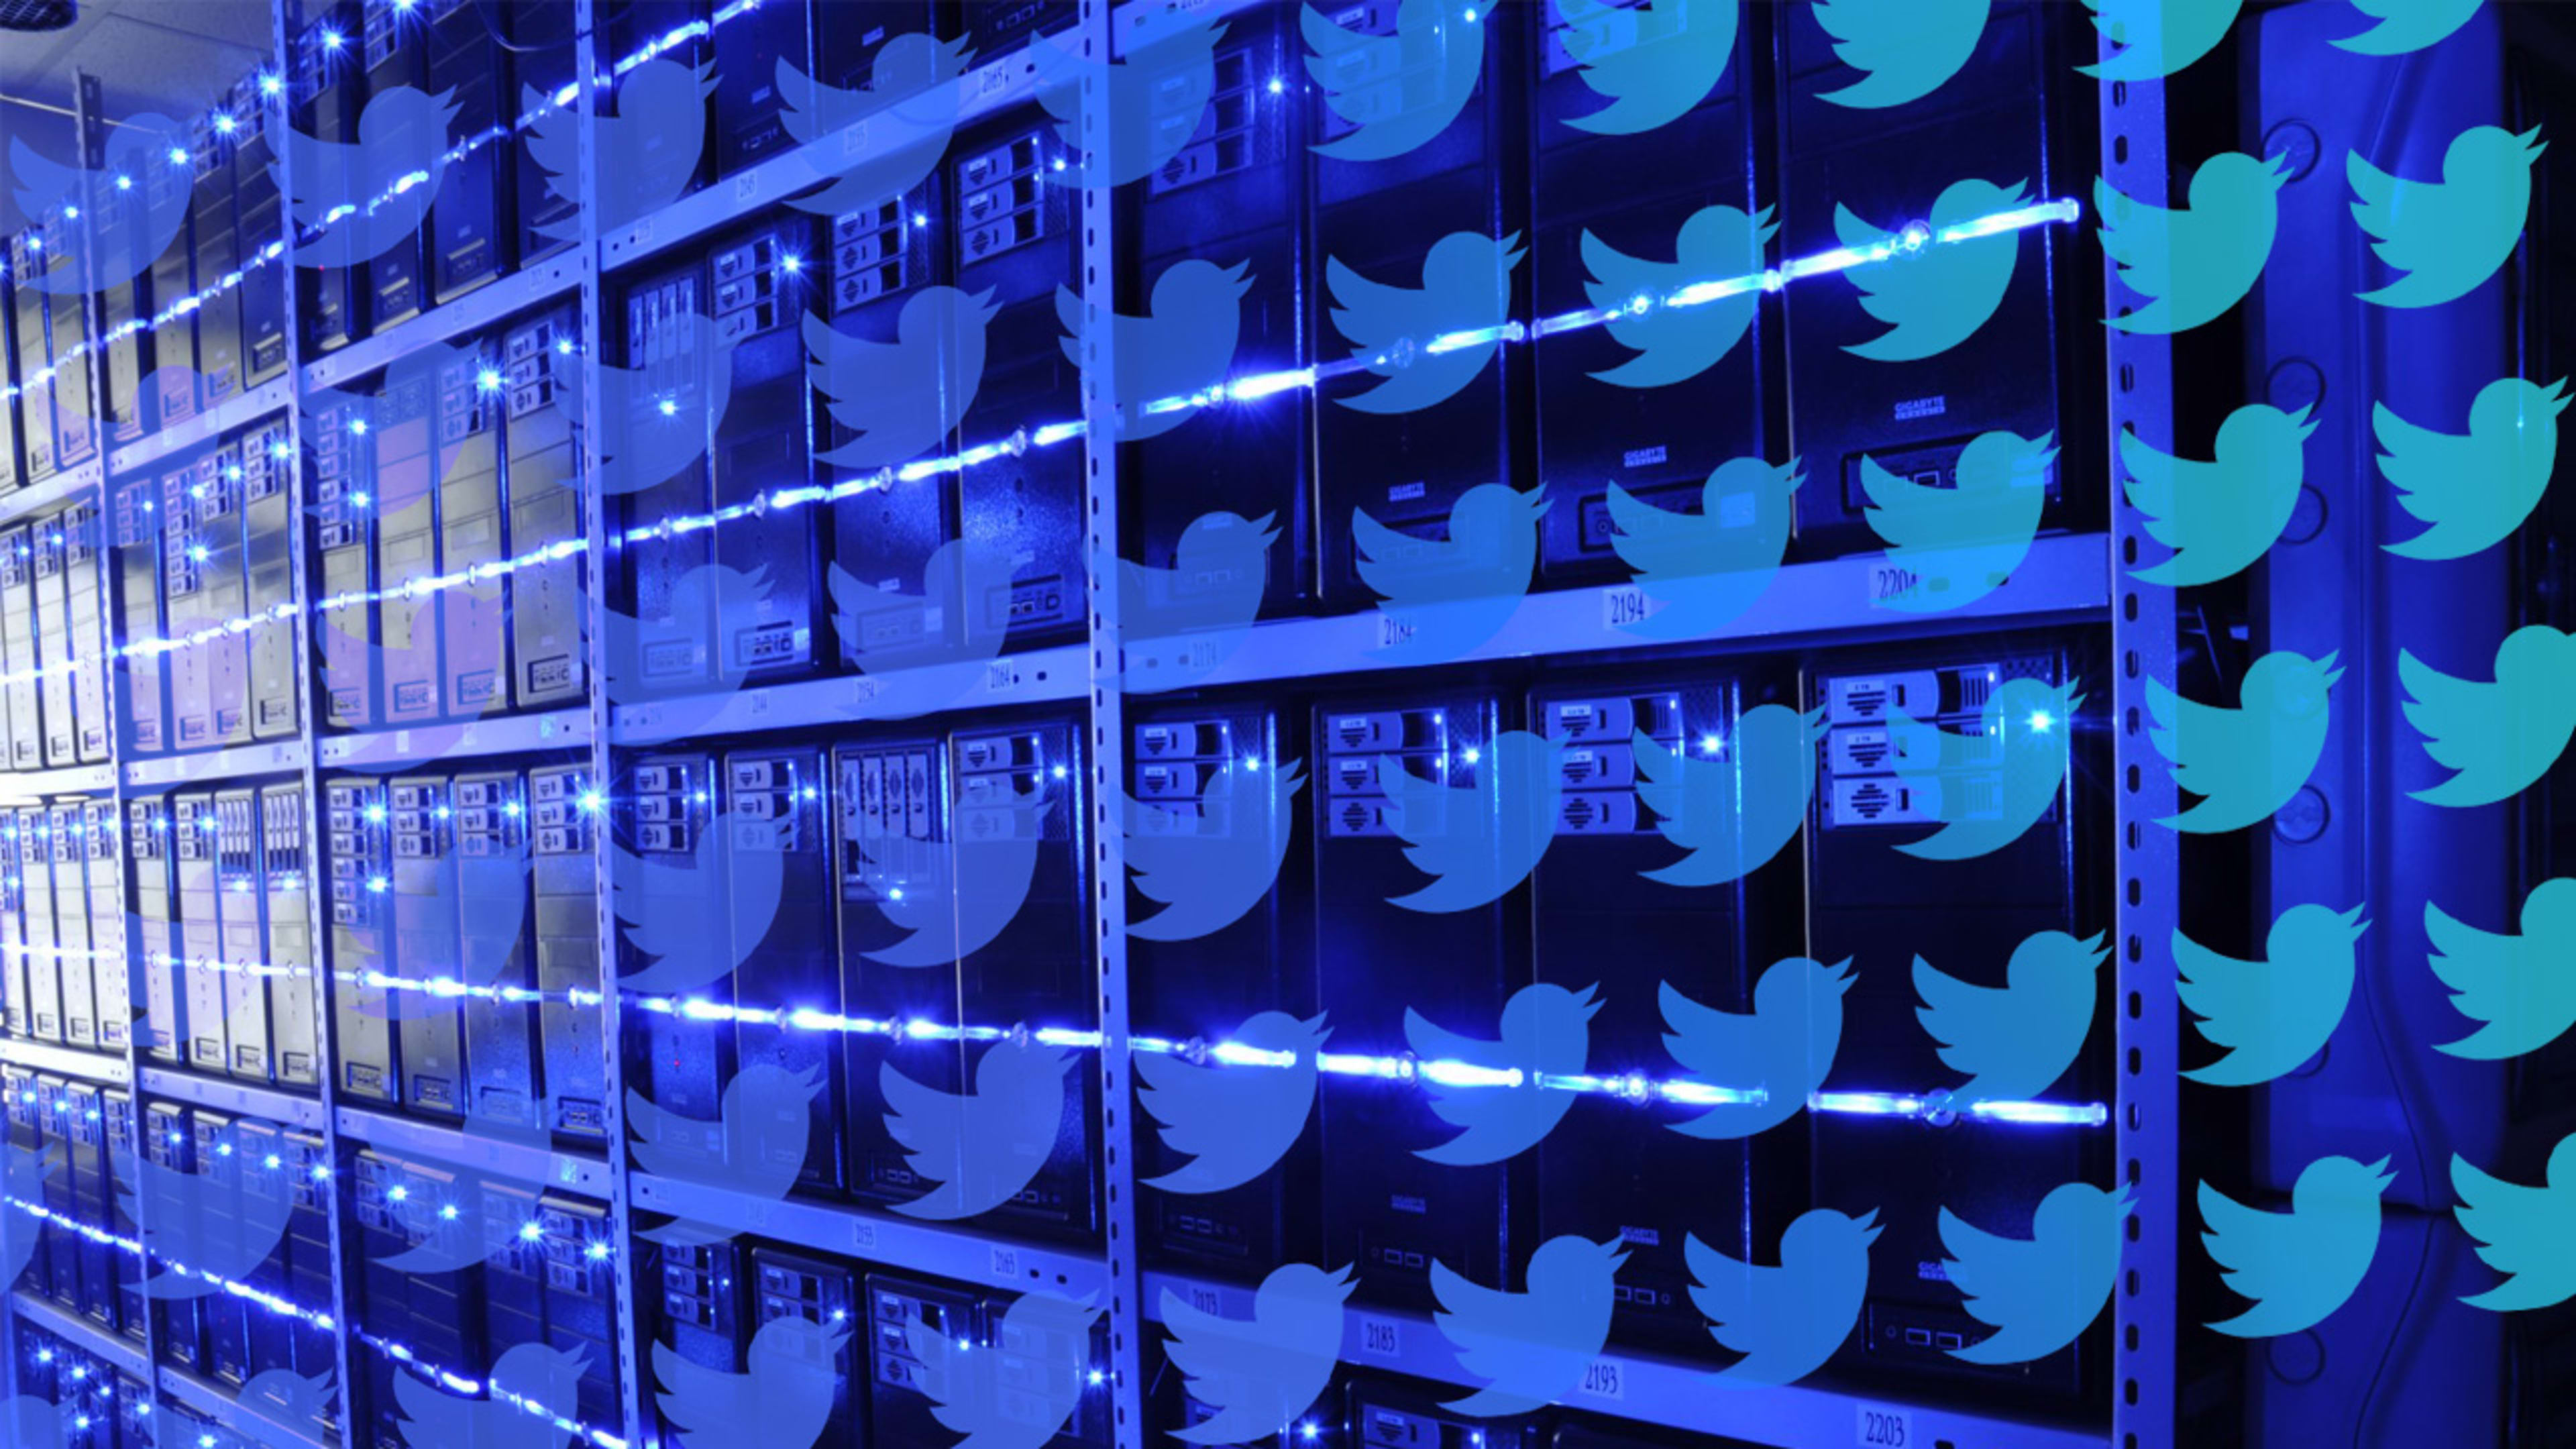 Twitter Security Chief Calls for Bolstered Cyber Regulation